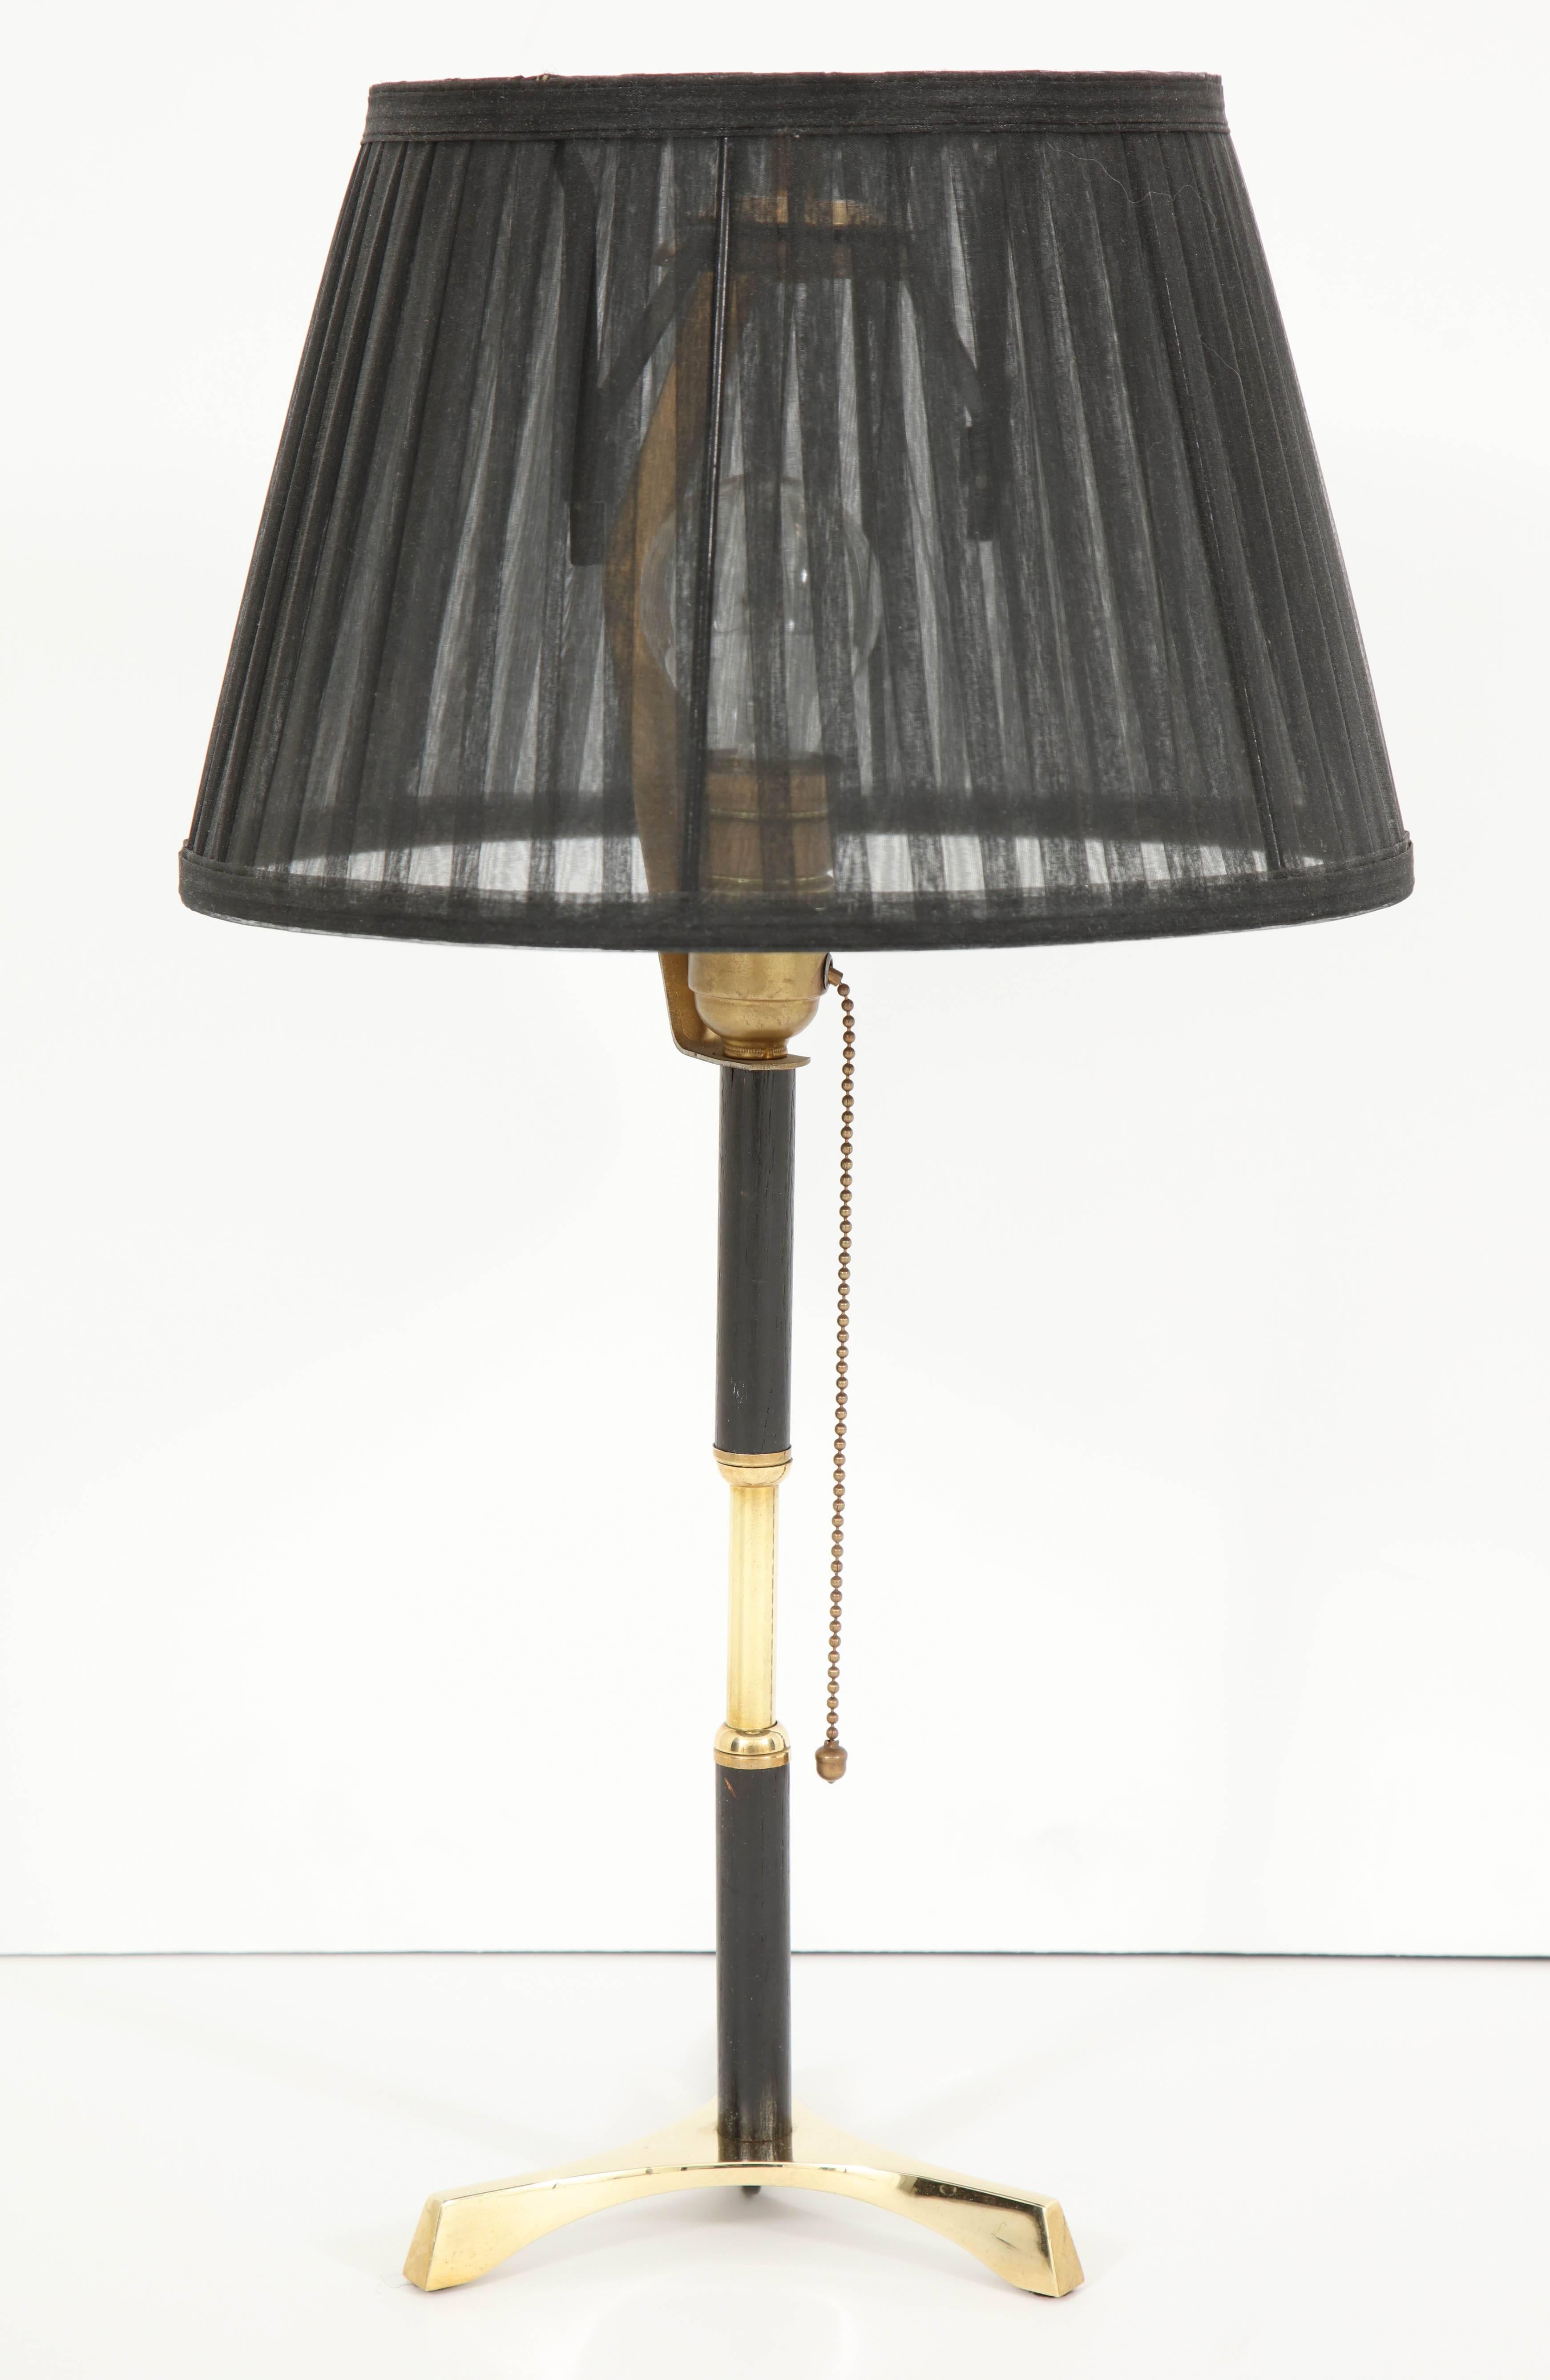 Mid-Century Modern Brass Table Lamp with Black Wood Details, circa 1960